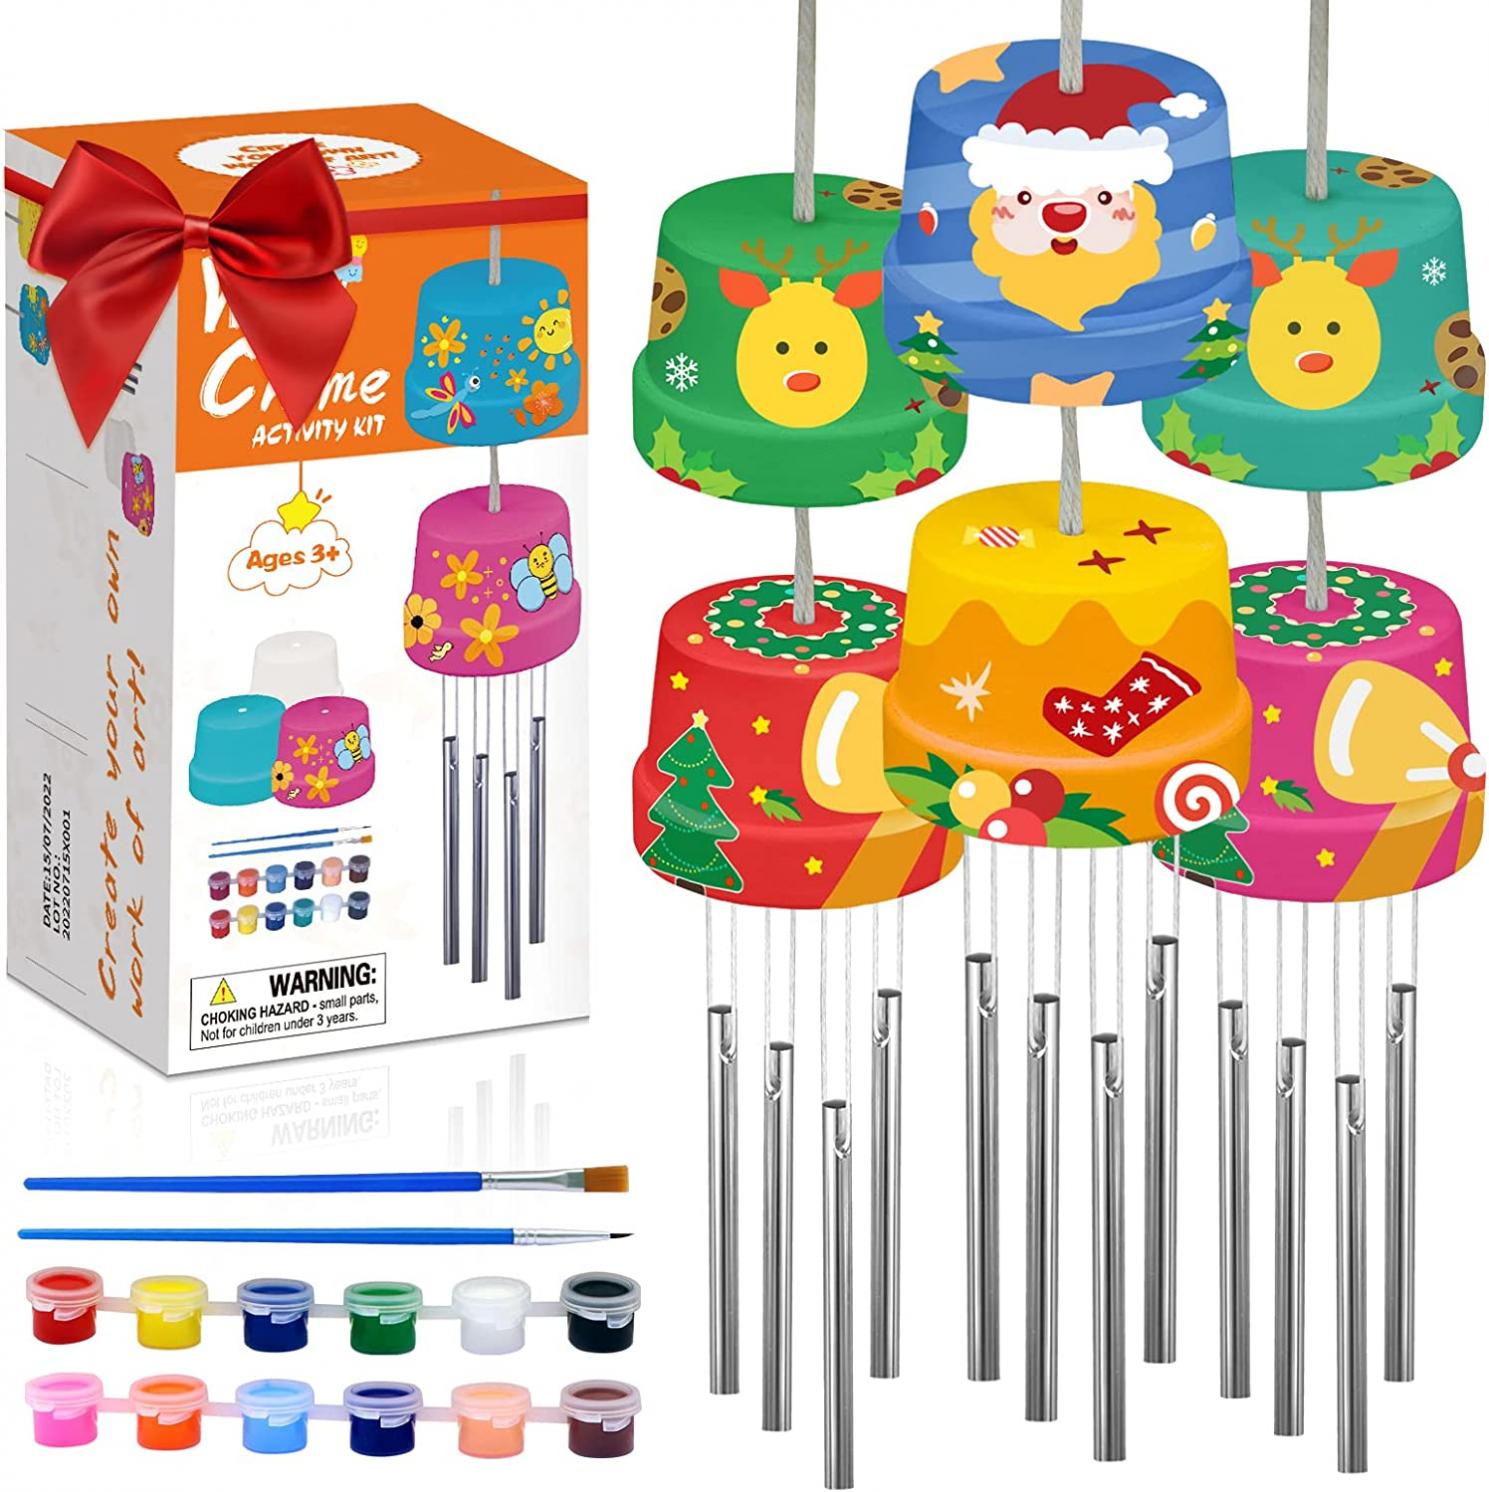 3-Pack Make A Wind Chime Kits - Arts & Crafts Construct & Paint Wind Powered Musical Chime DIY Gift for Kids, Boys & Girls